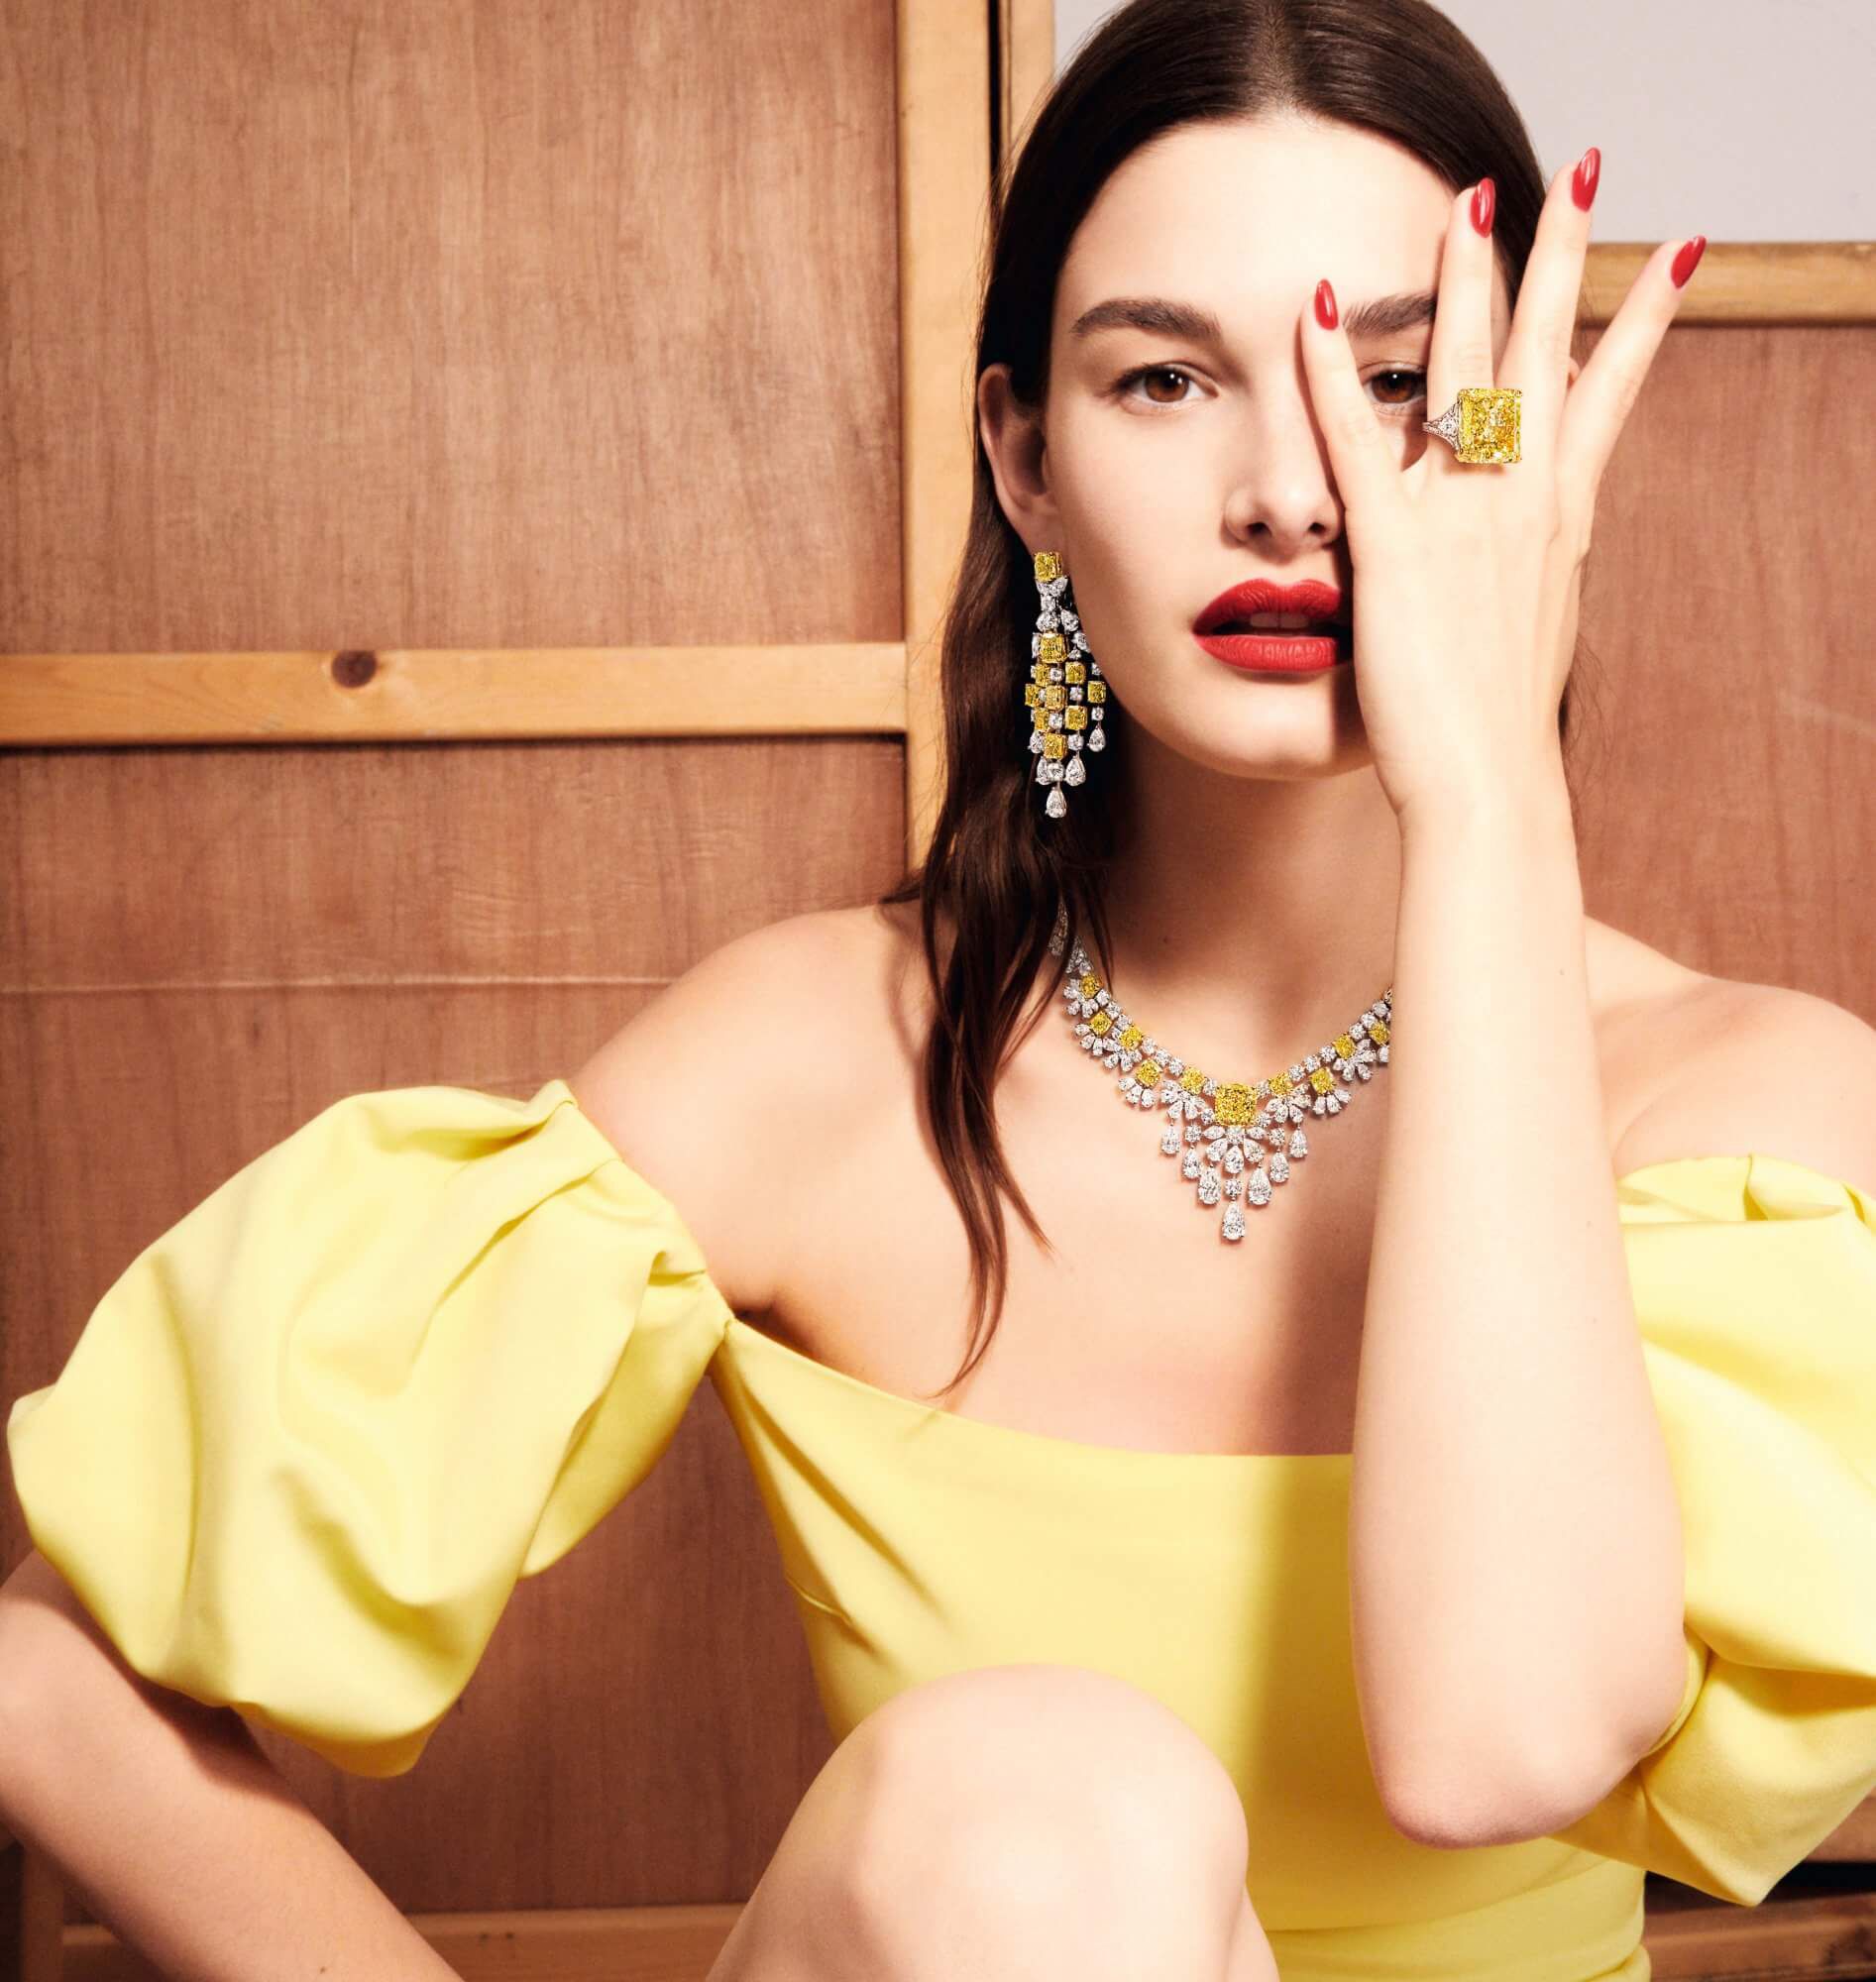 Model wears Graff yellow and white diamond high jewellery earrings and ring